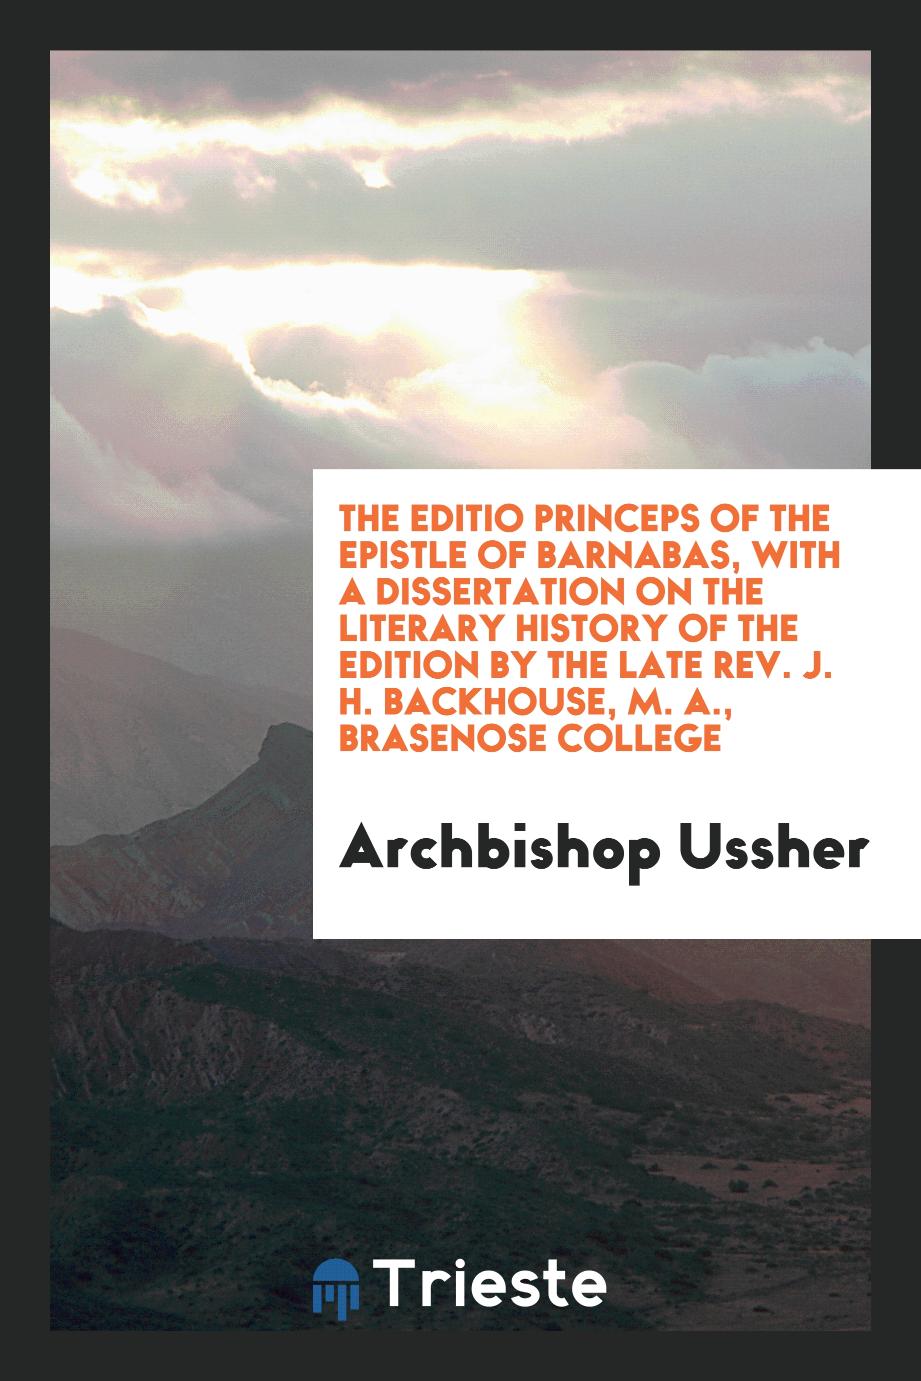 The Editio Princeps of the Epistle of Barnabas, with a dissertation on the literary history of the edition by the late rev. J. H. Backhouse, M. A., Brasenose college